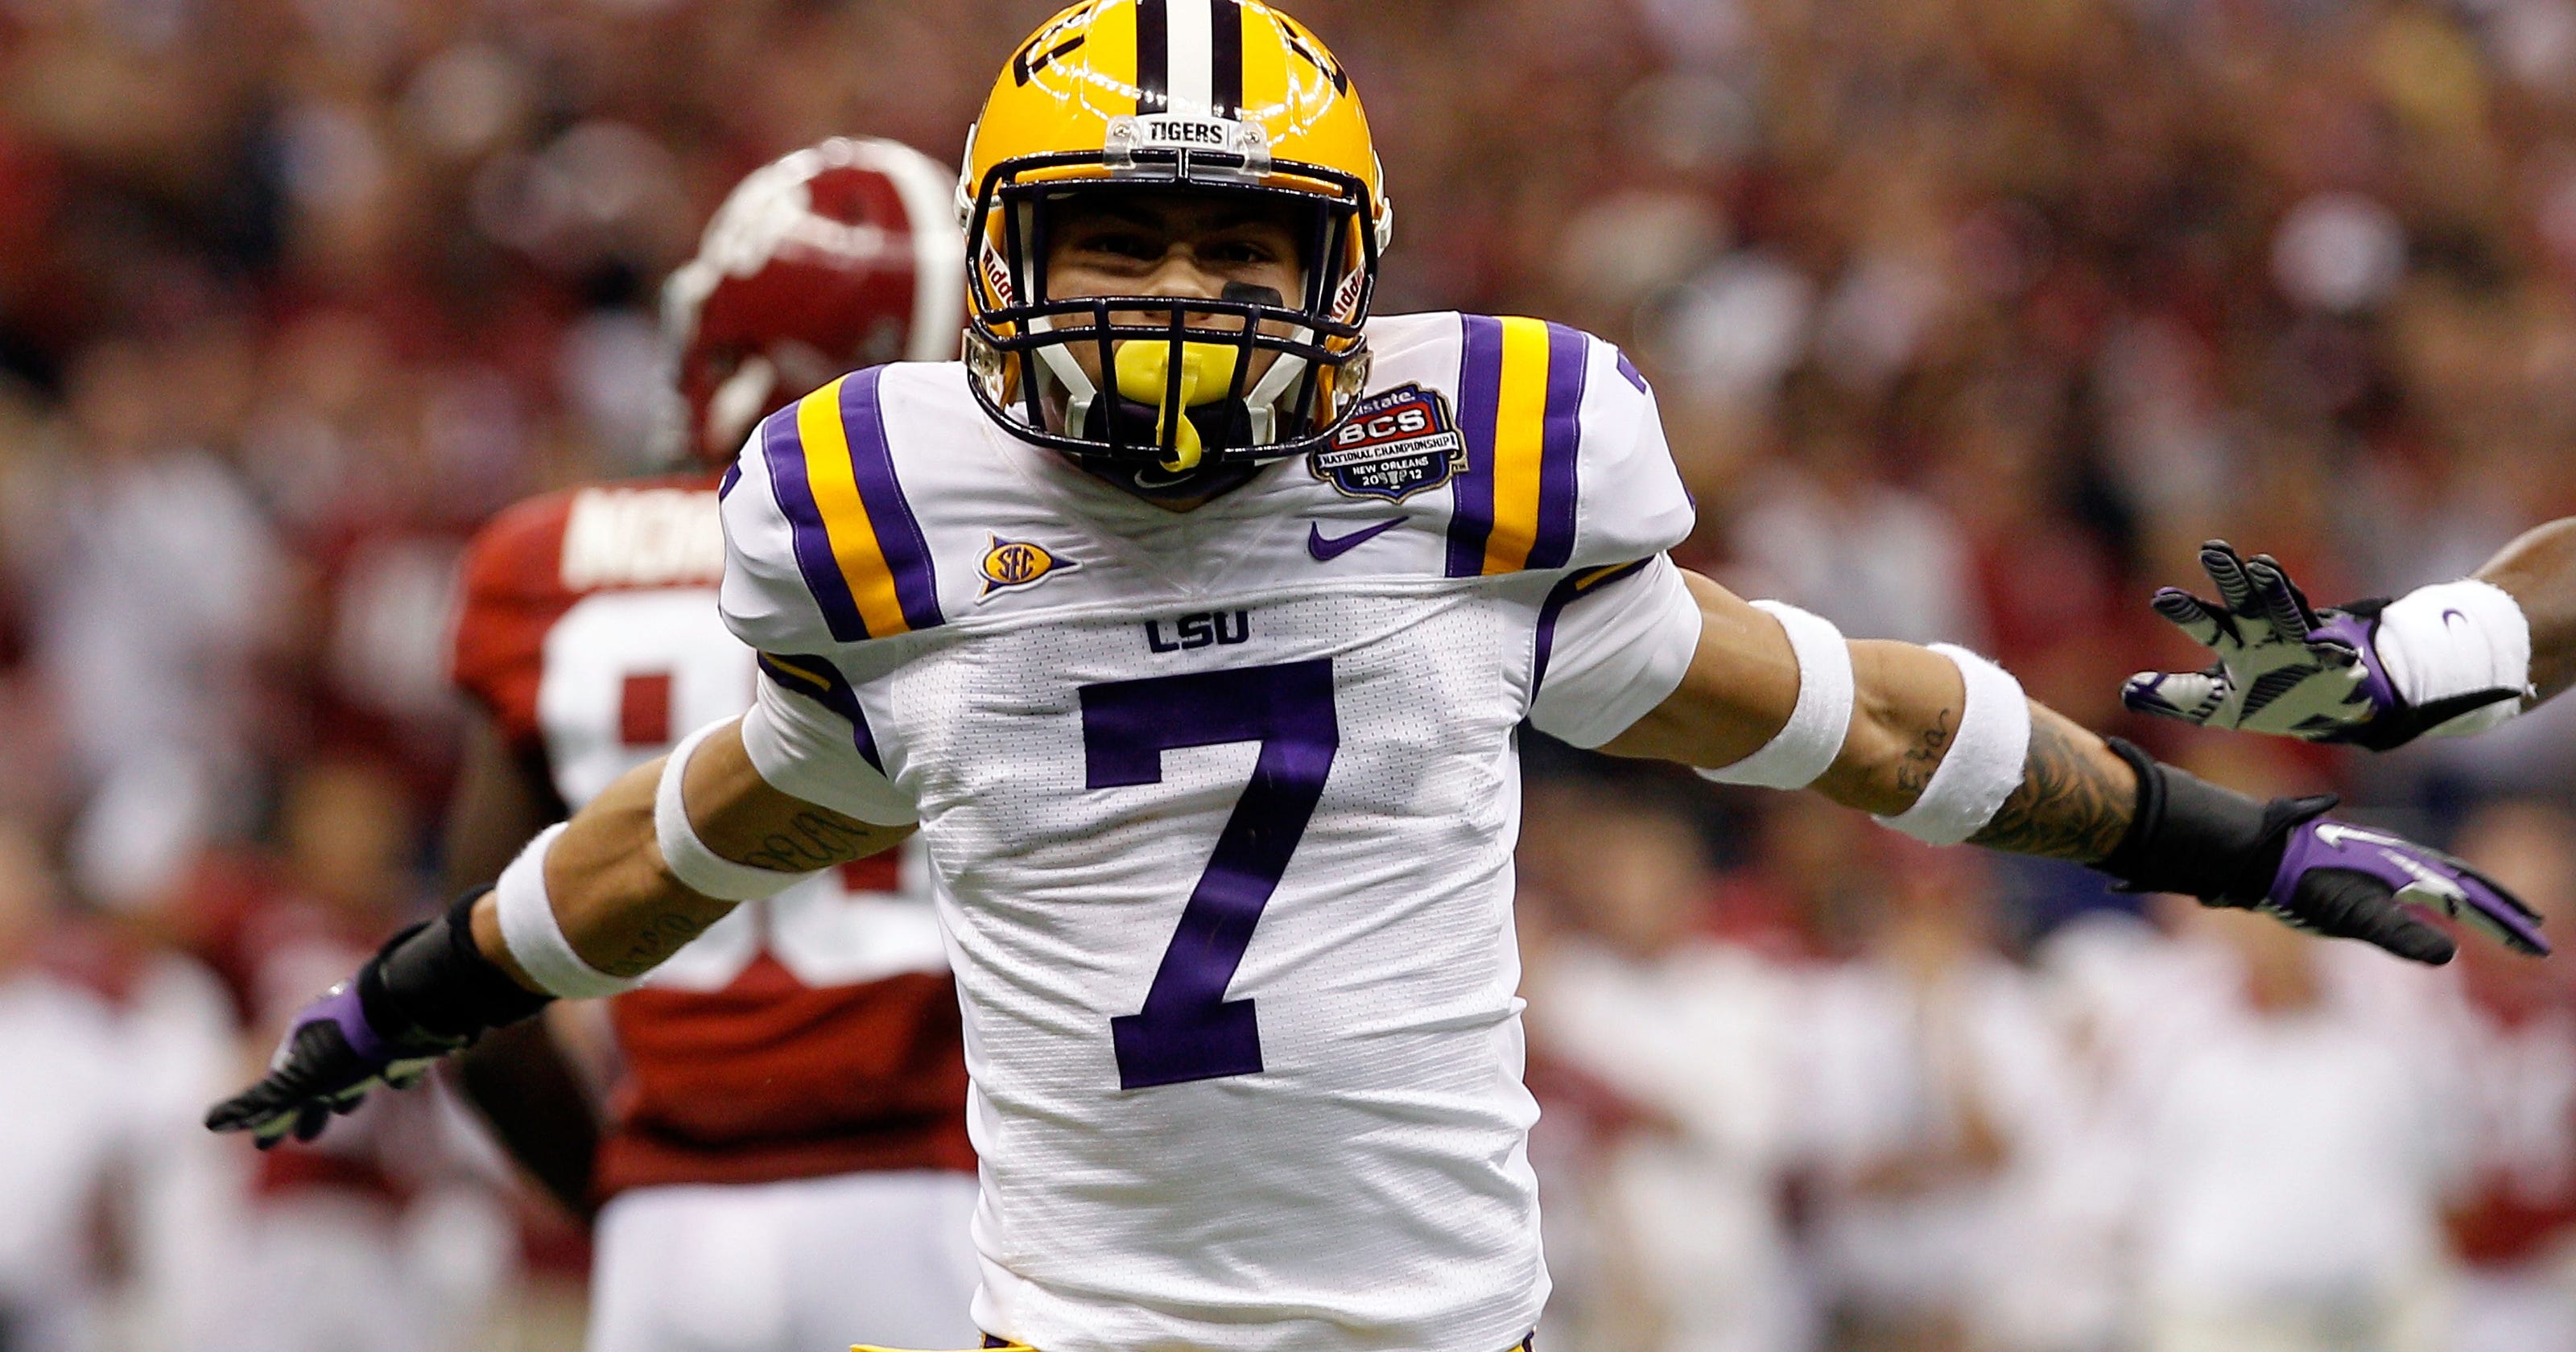 Bell: Tyrann Mathieu suits up, says he's all business